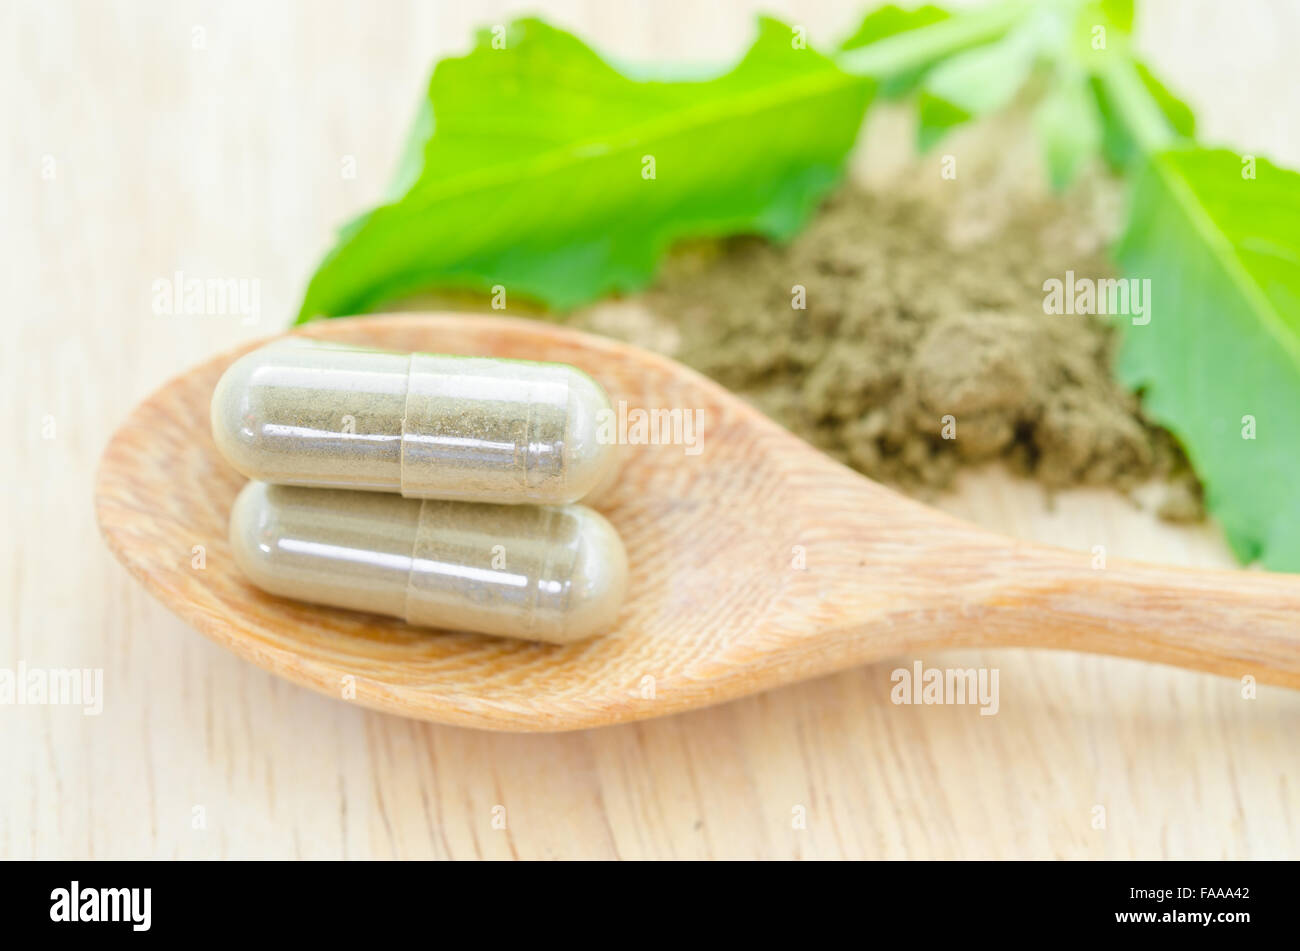 Herb capsule with green herbal leaf on wooden background. Stock Photo